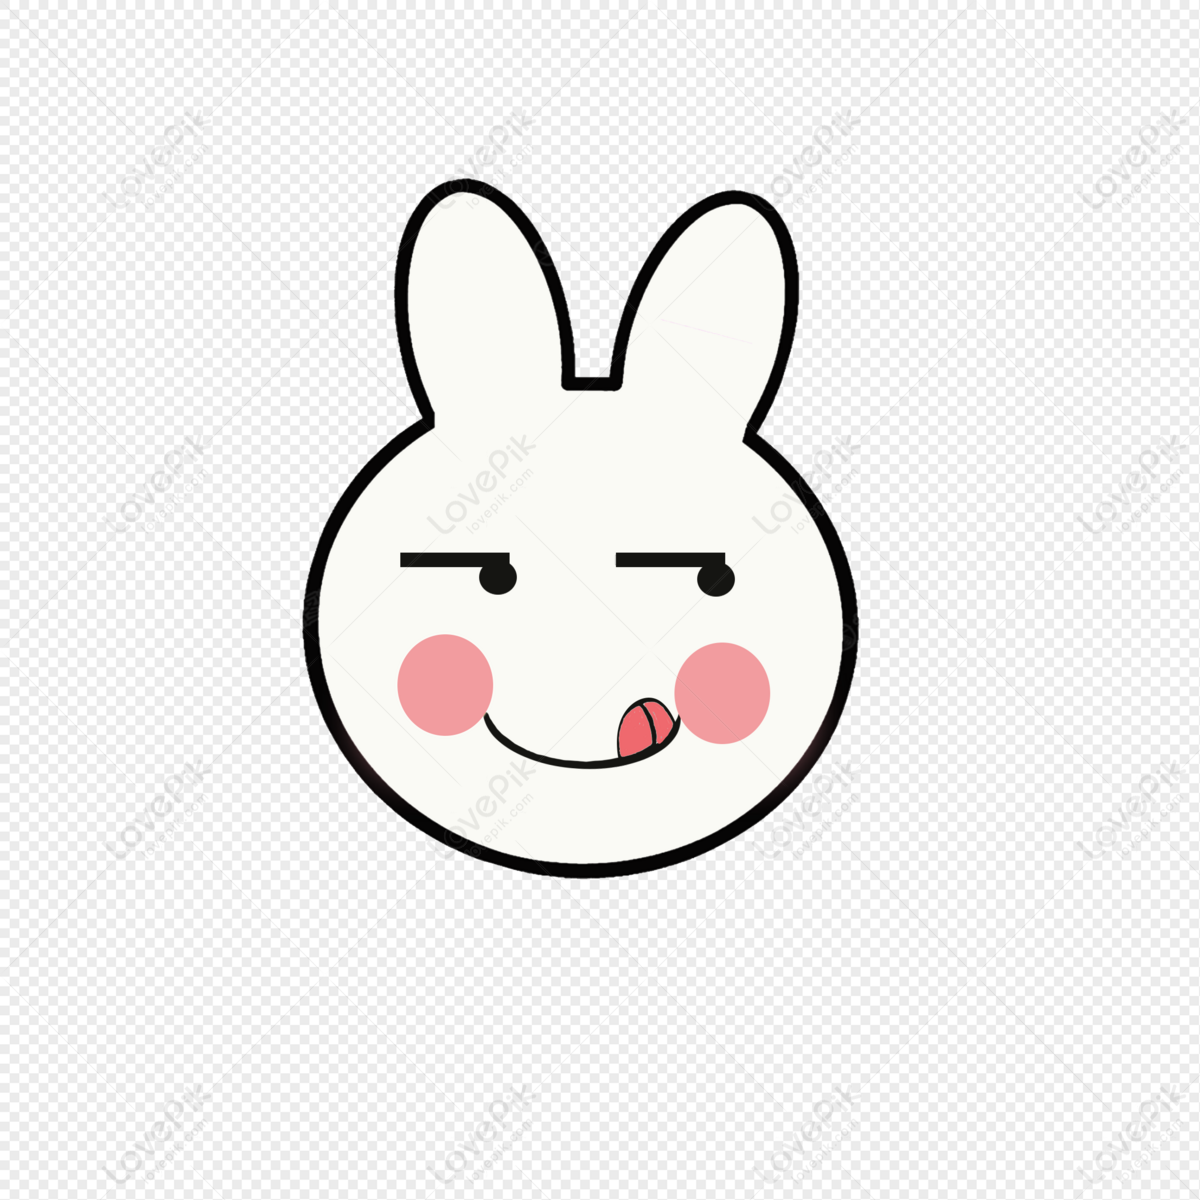 Hand Drawn A Cute Cartoon Rabbit Free PNG And Clipart Image For ...